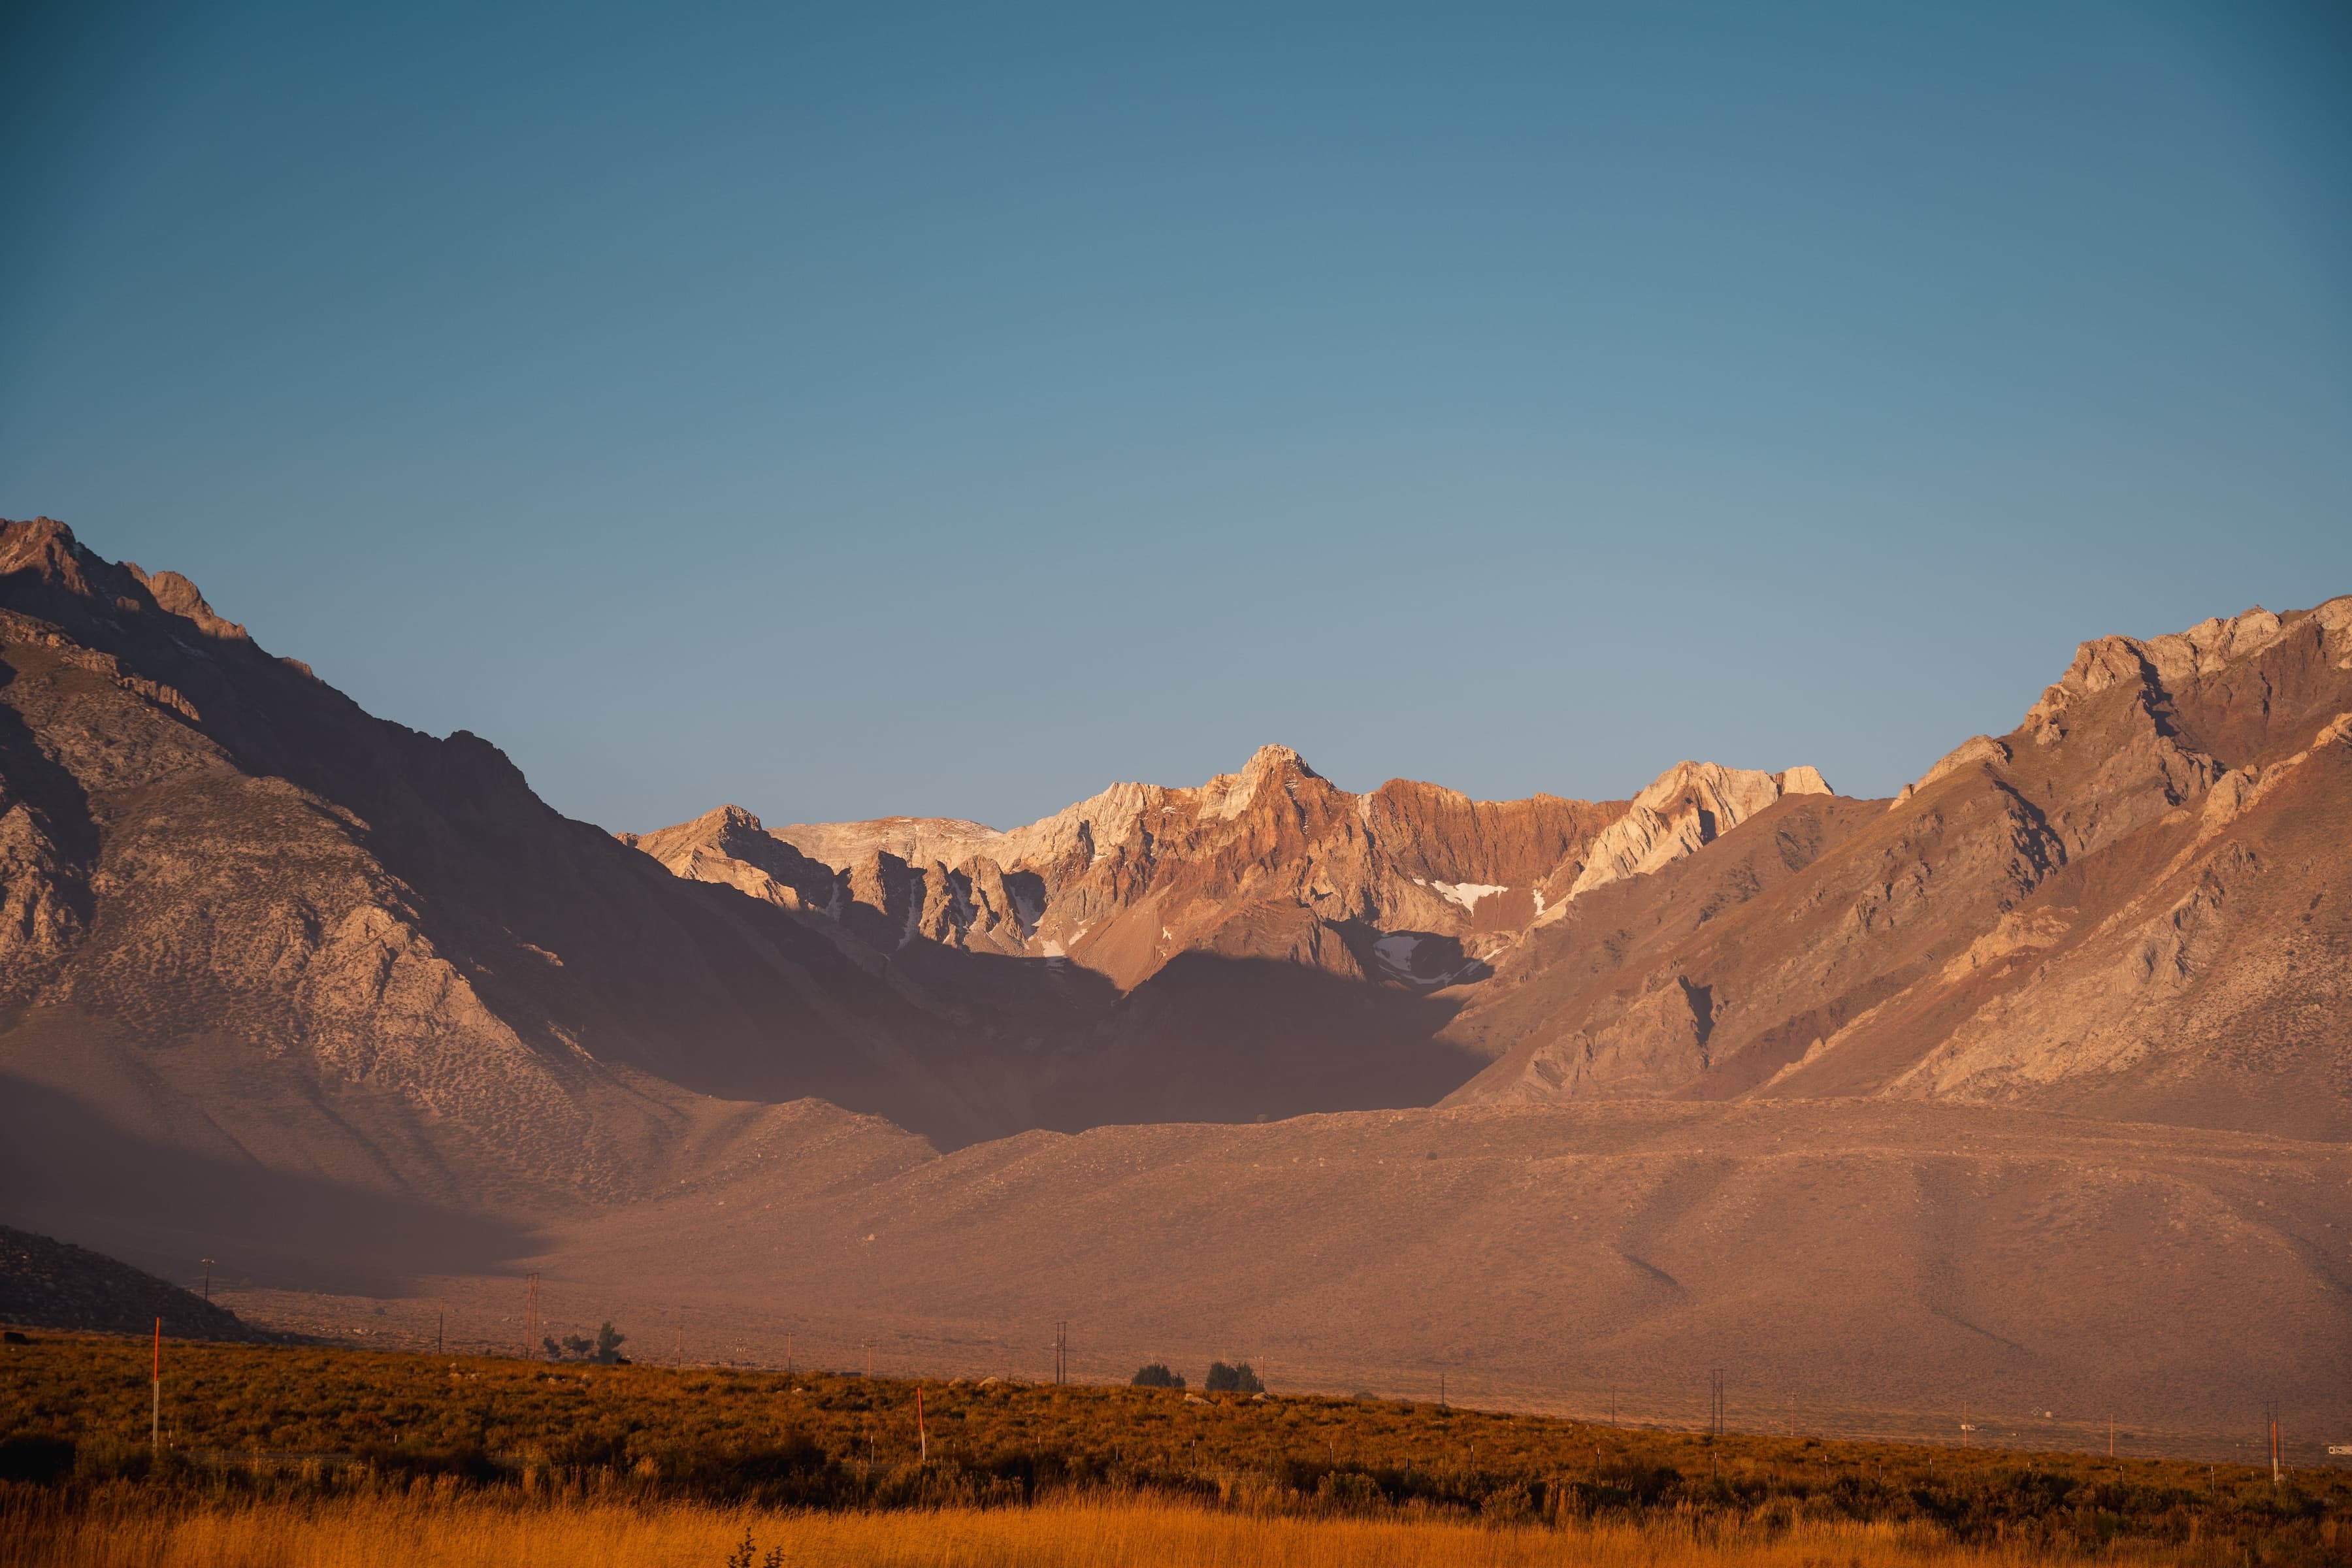 A clear view of a mountain range with peaks illuminated by the warm glow of the morning sun, with a field of tall grass in the foreground.